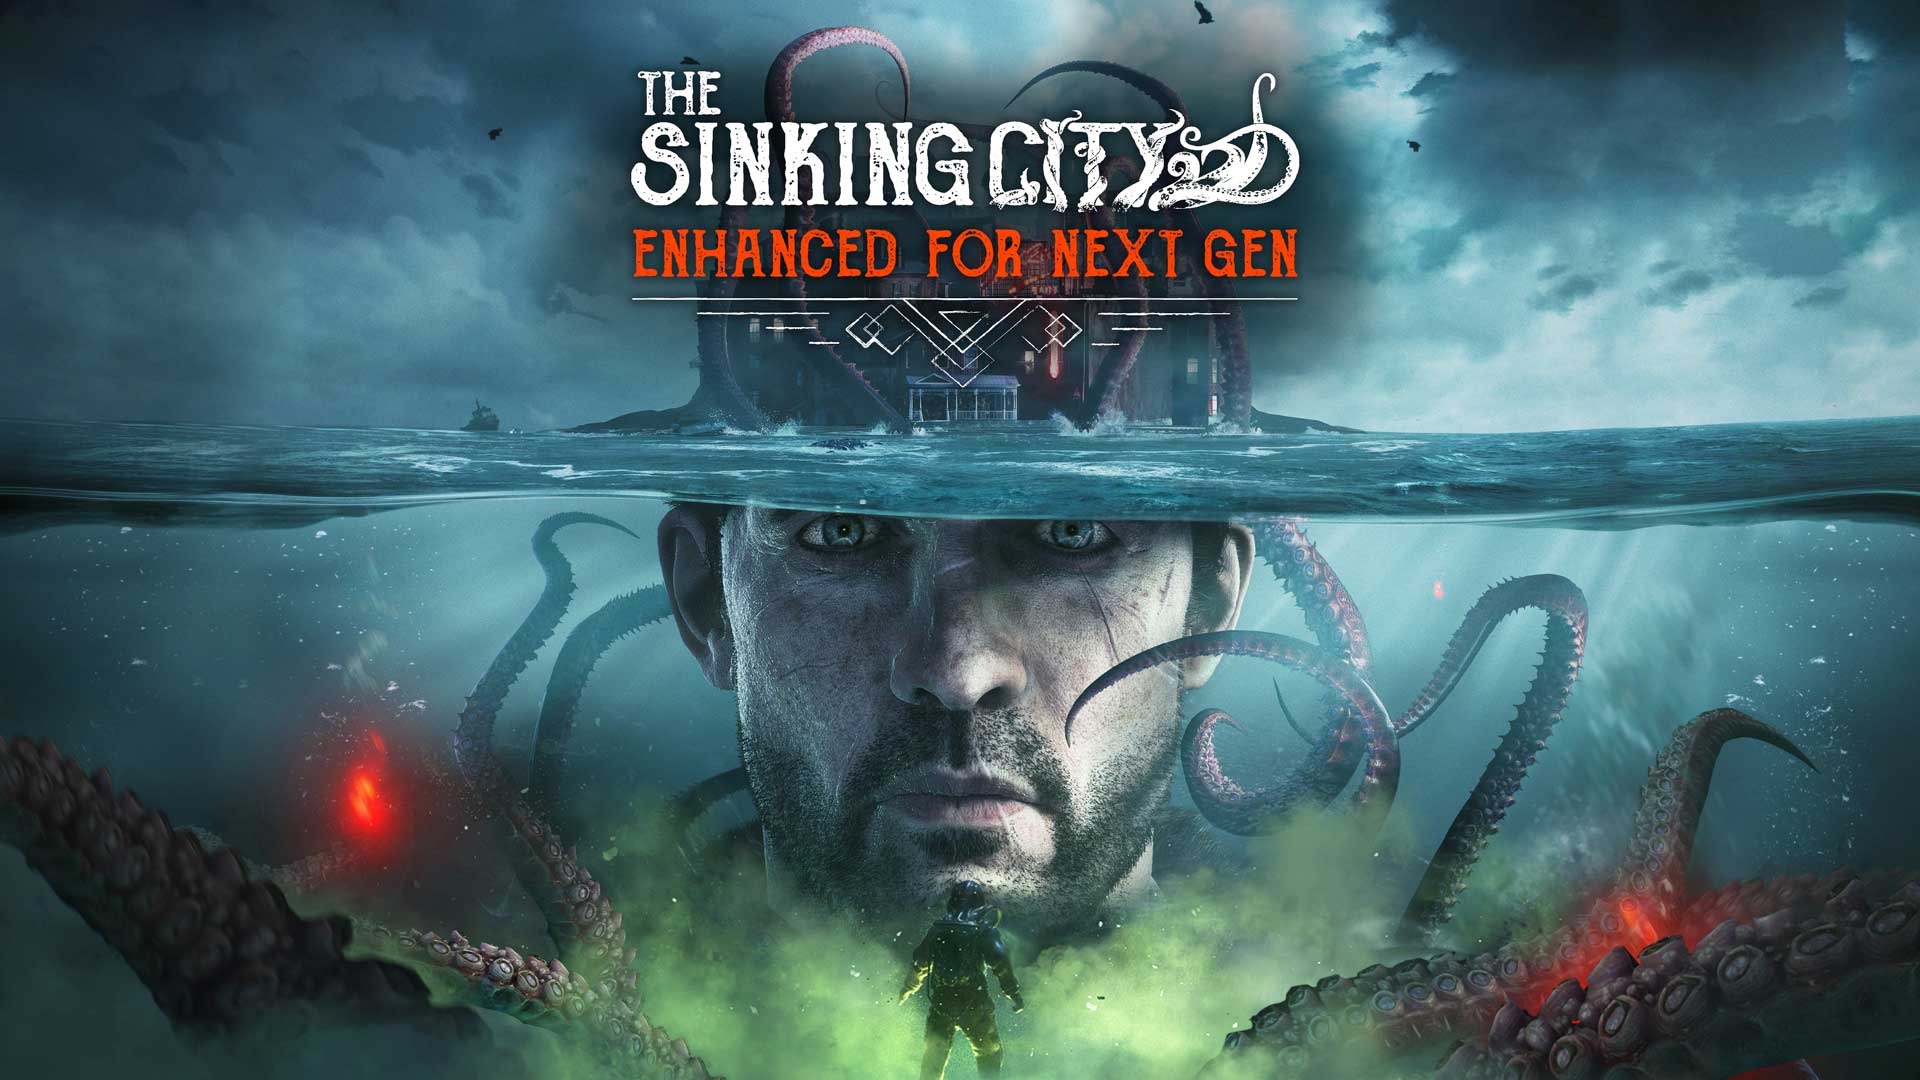 The Sinking City Announced For PS5 and Launches Tomorrow